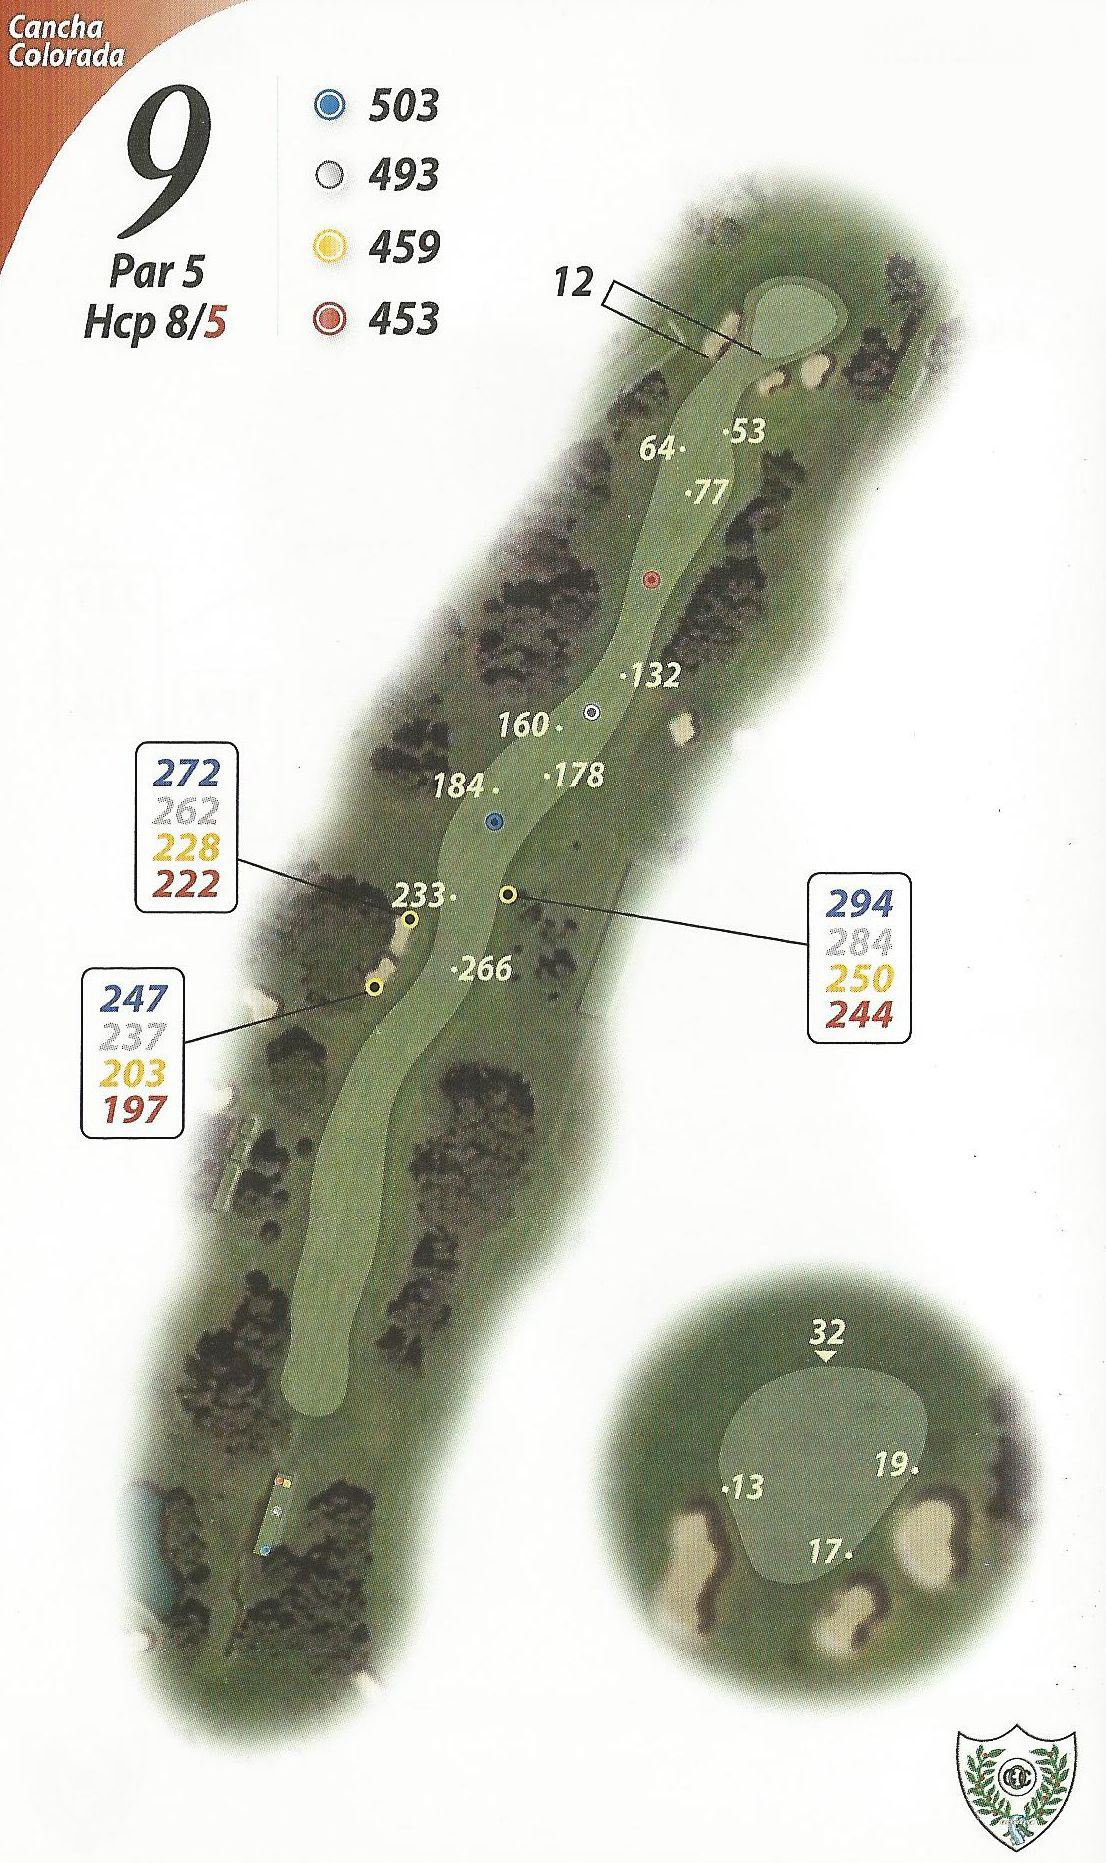 Hole 9 (red)